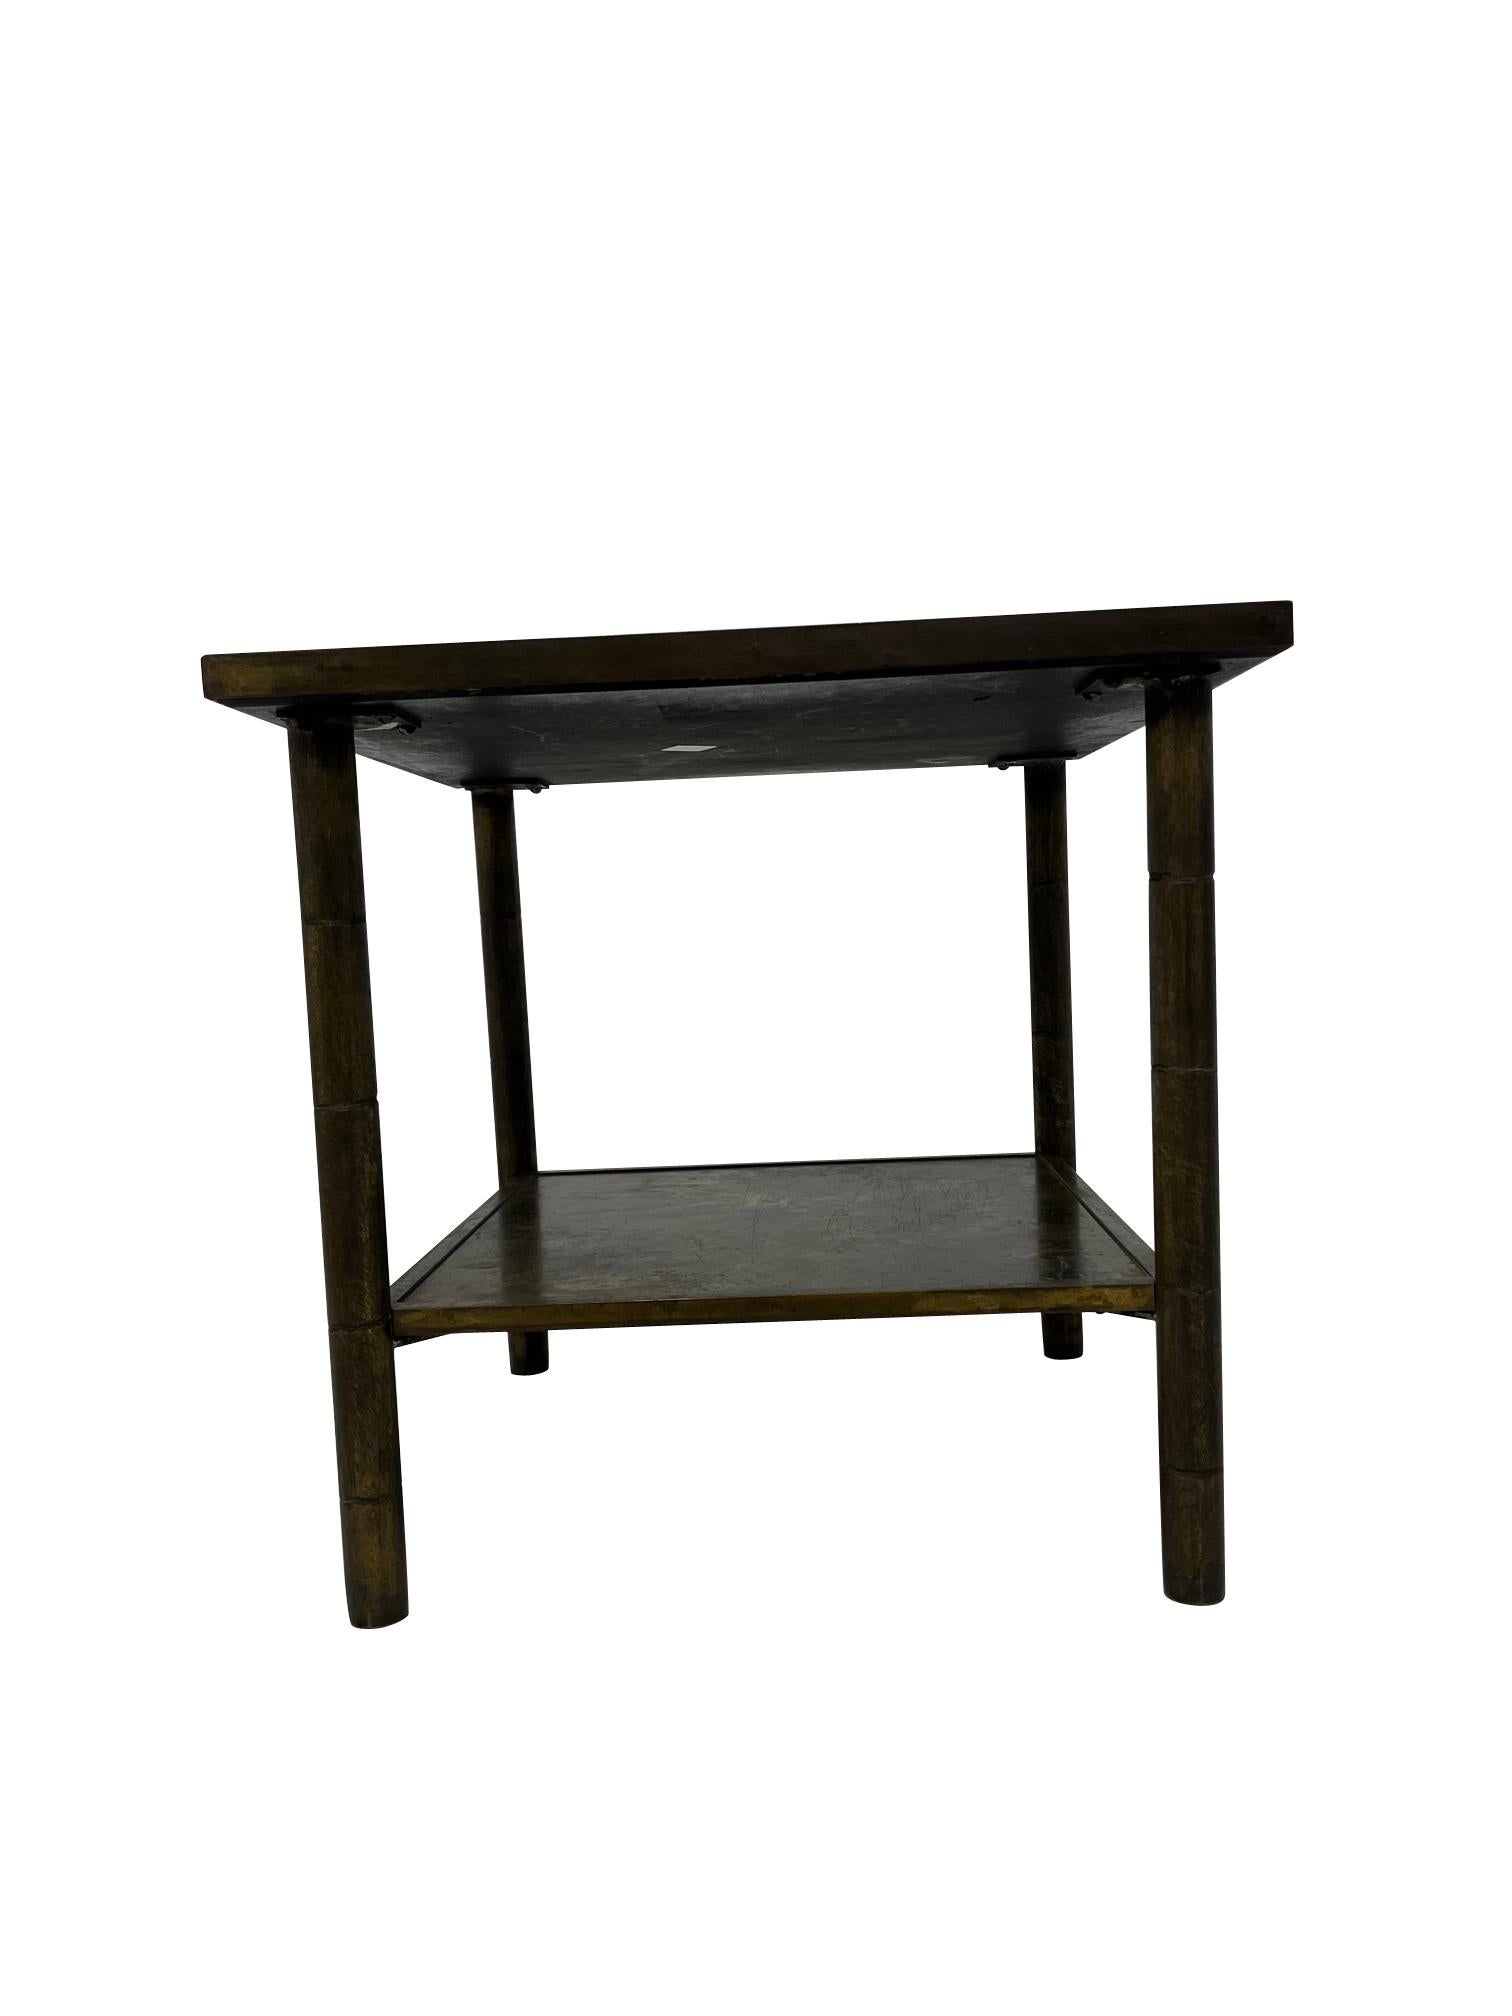 This rare 2-tier side table is composed of patinated bronze with a hand crafted acid etched finish..1960's (signed “Philip Kelvin Laverne” .    This is a wonderful example of the art of Philip & Kelvin Laverne.table would be an elegant addition to